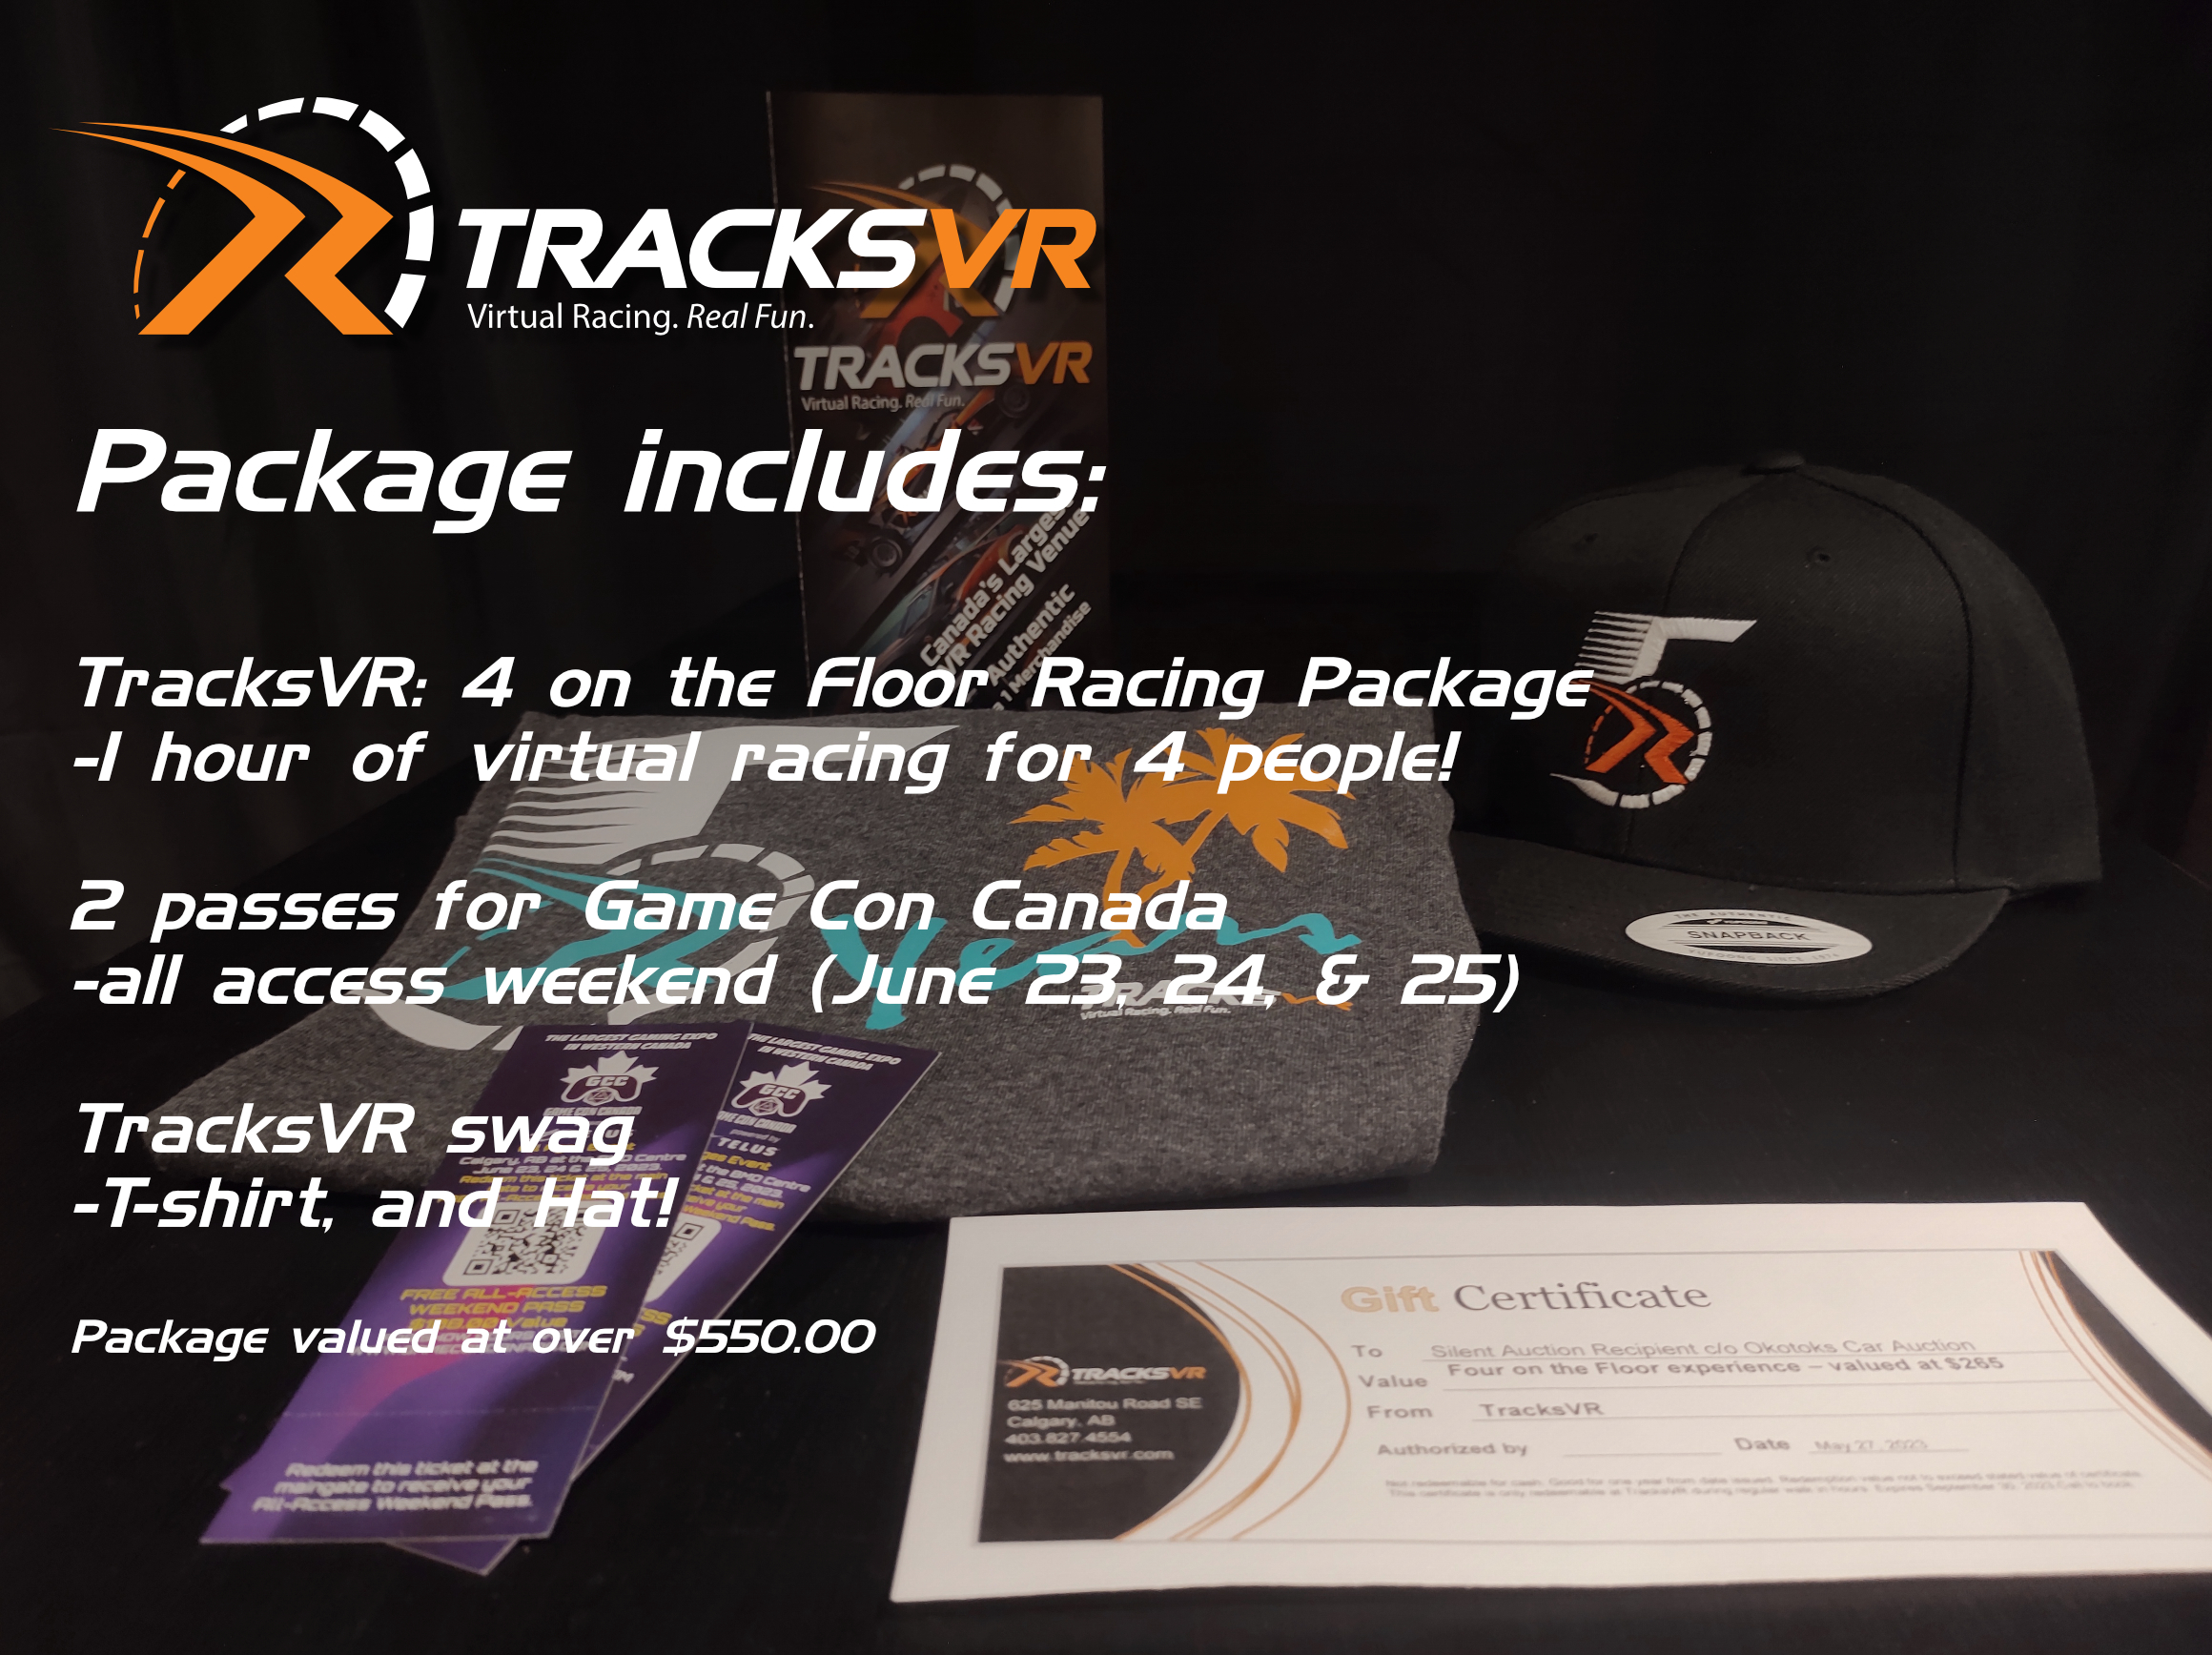 Virtual Racing Experience For Charity